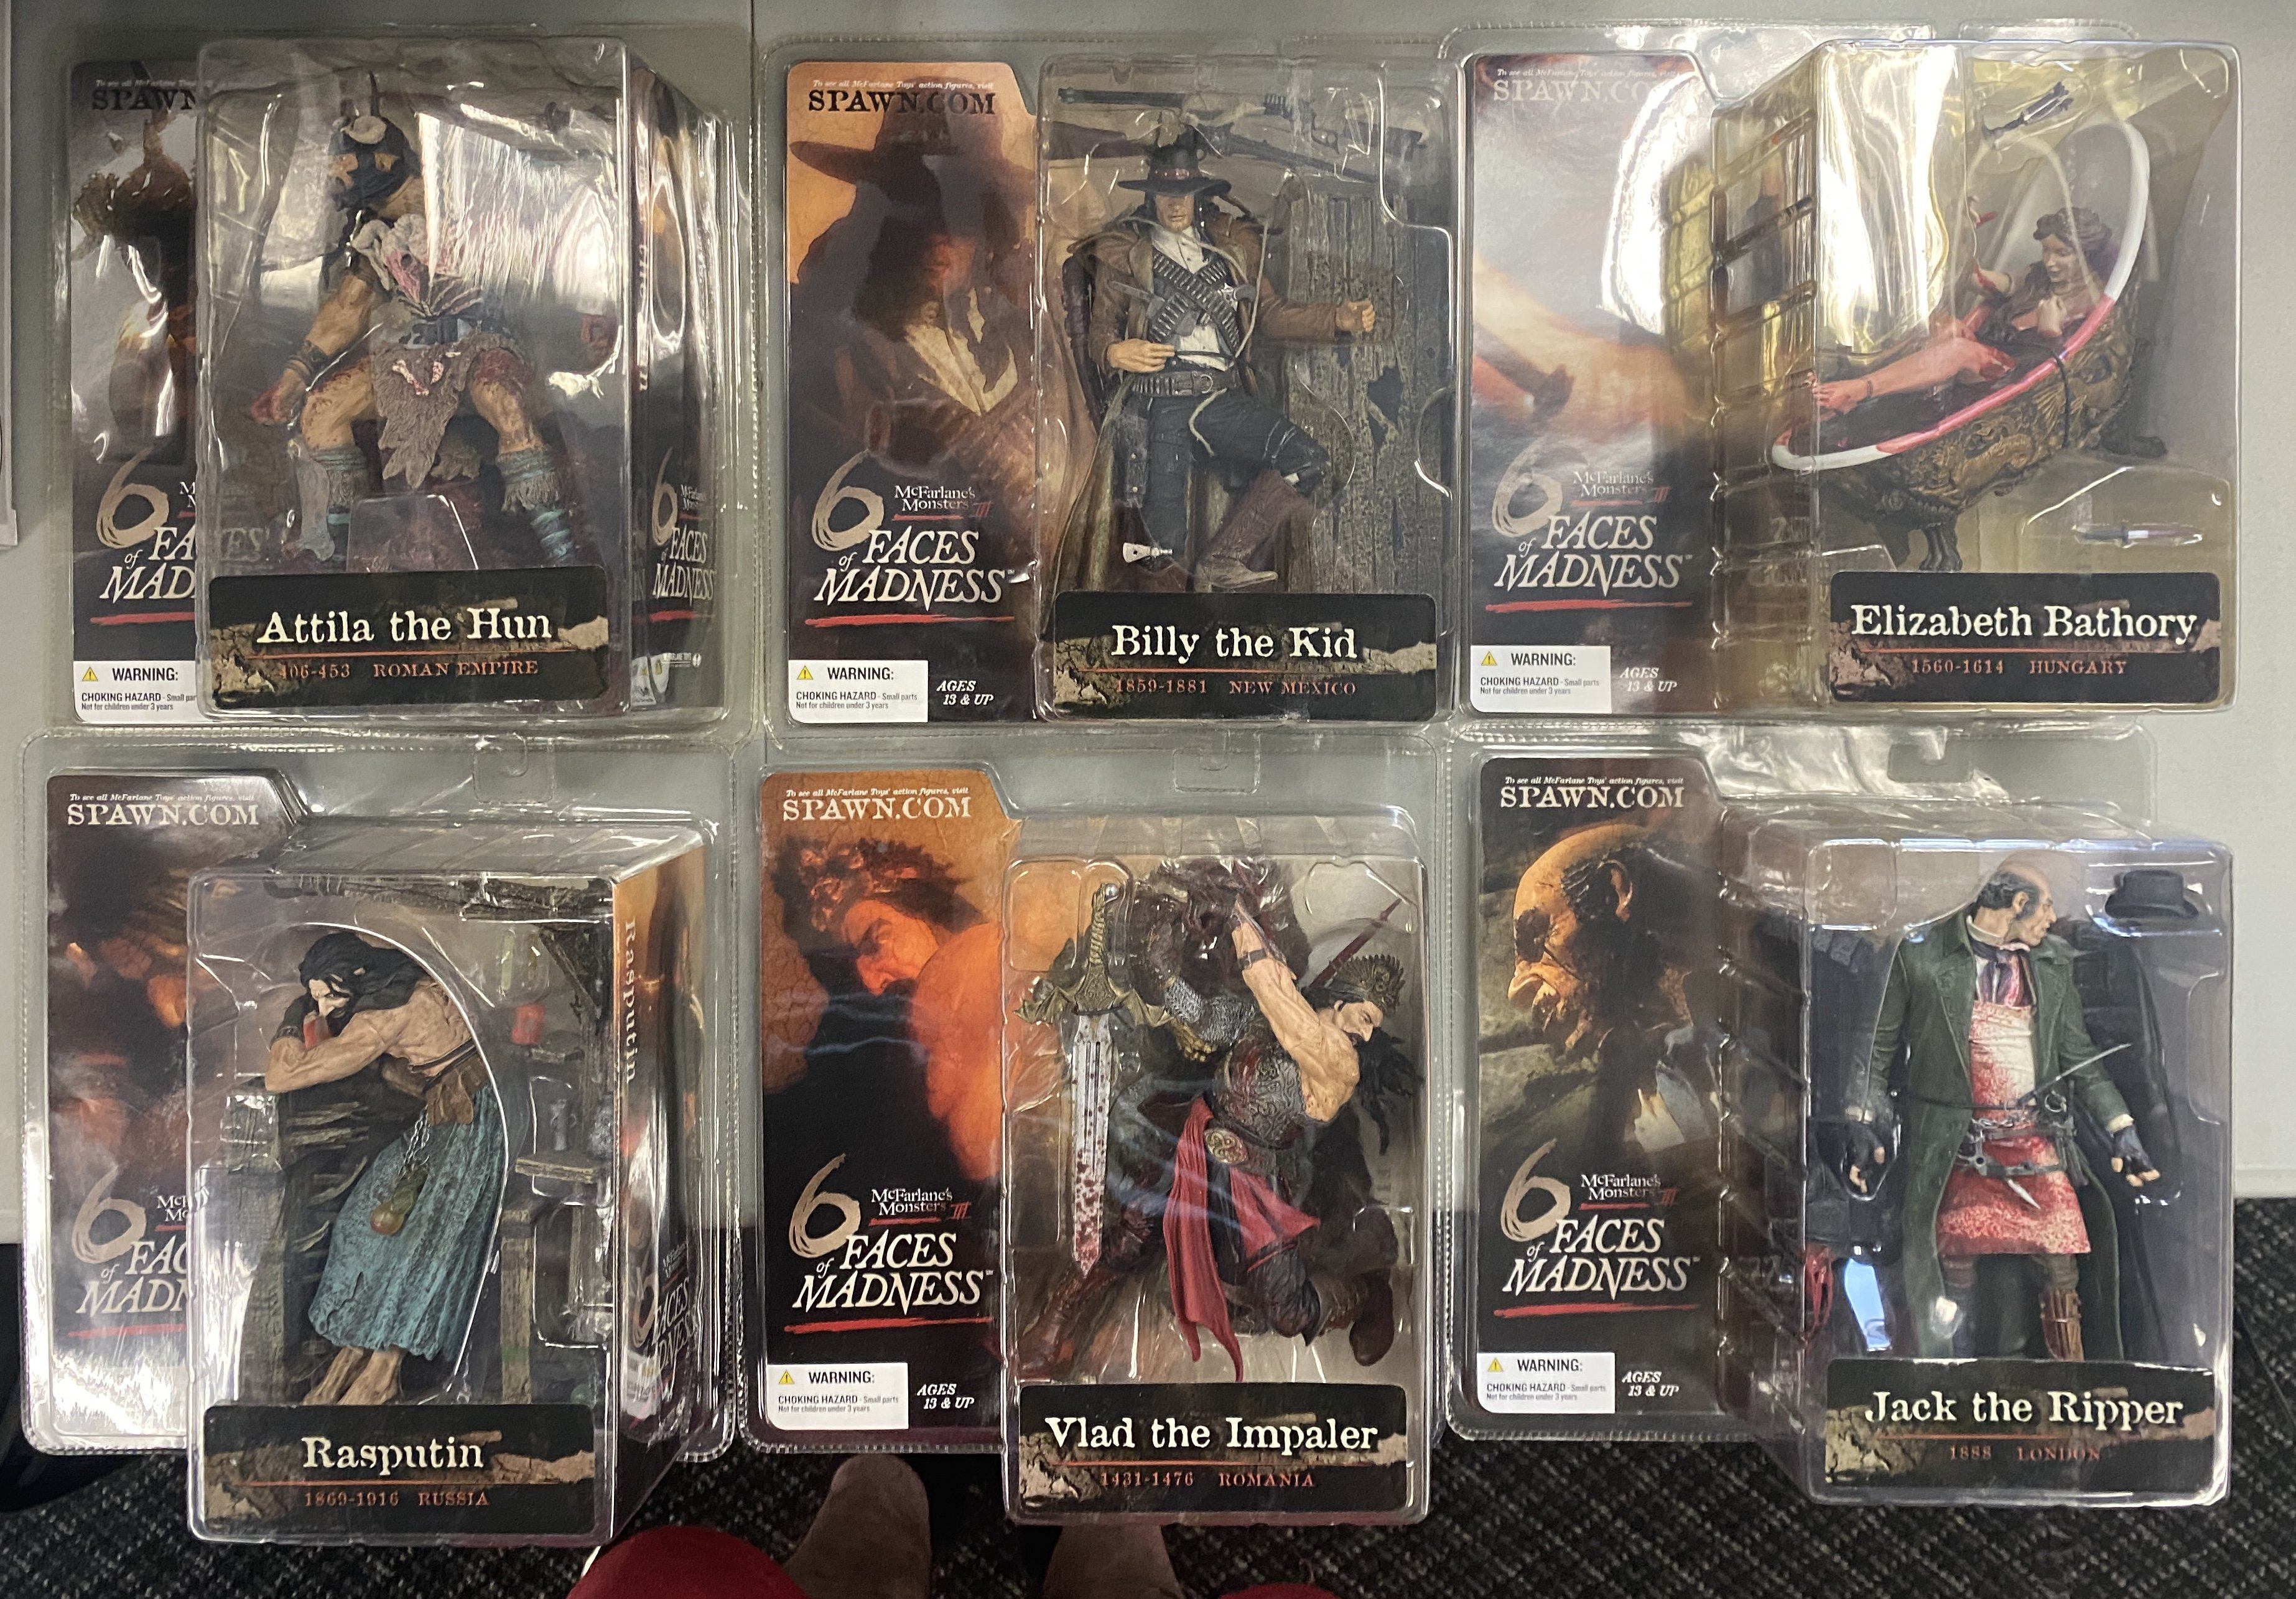 Mcfarlane 6 Faces of Madness Full Set of Six Action Figures (Billy the Kid)  (Atilla the Hun) (Vlad the Impaler) (Jack the Ripper) (Elizabeth Bathory)  